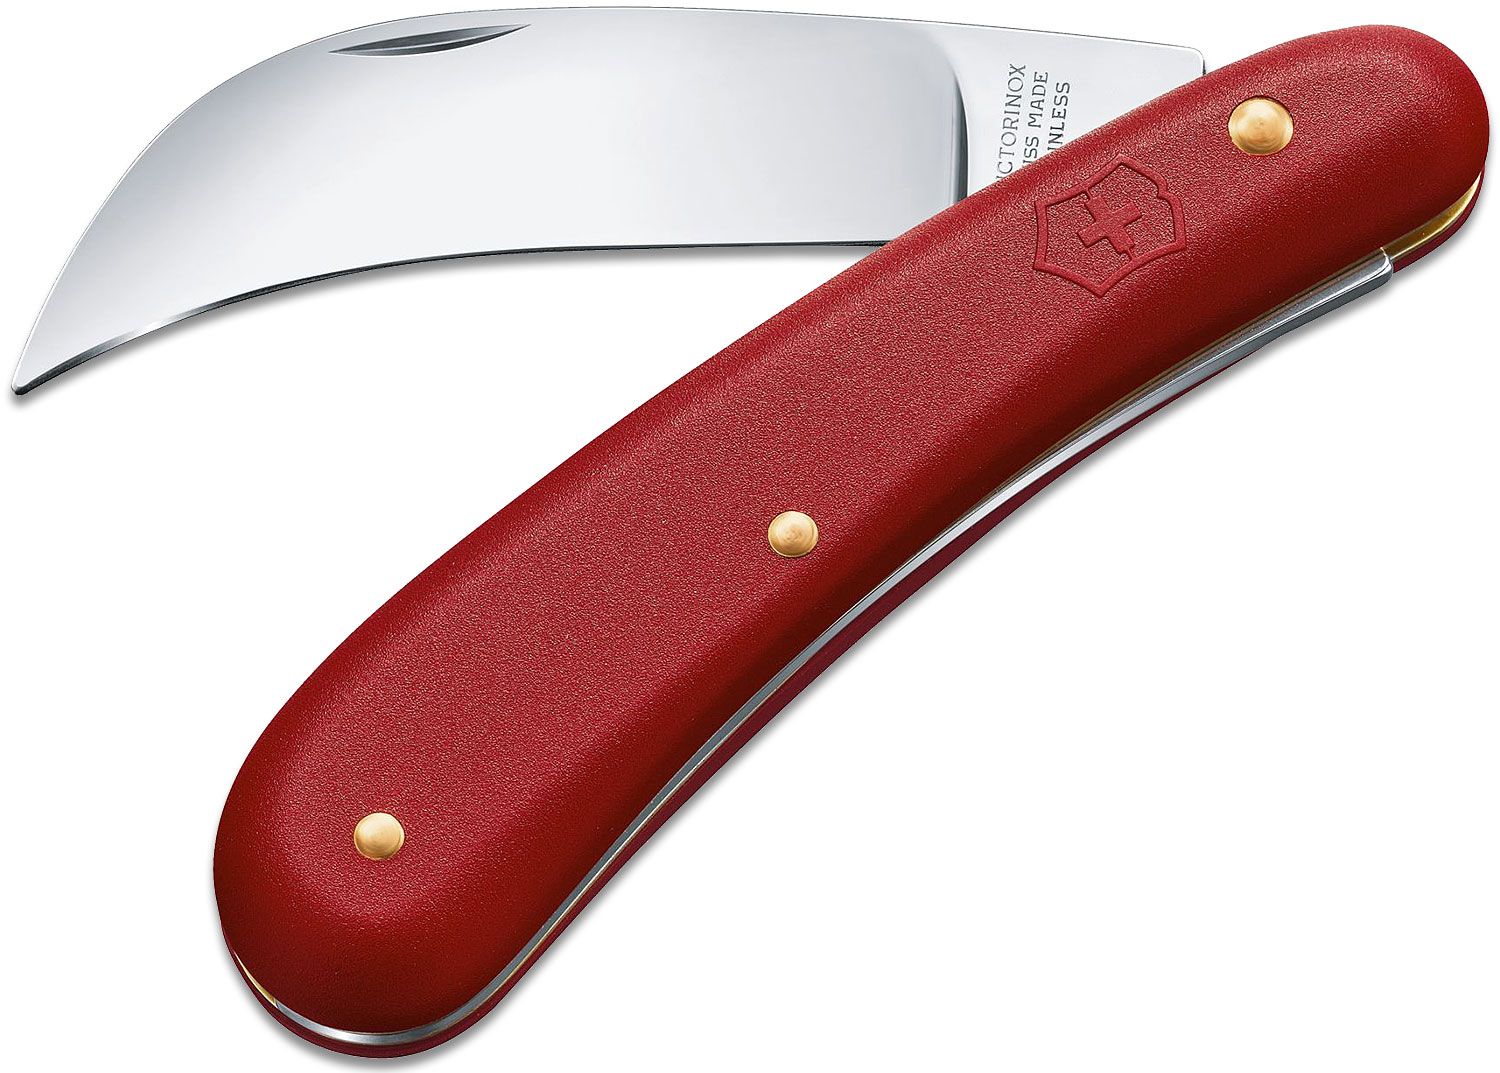 Victorinox Swiss Army Knives - All Models the Most Reviews